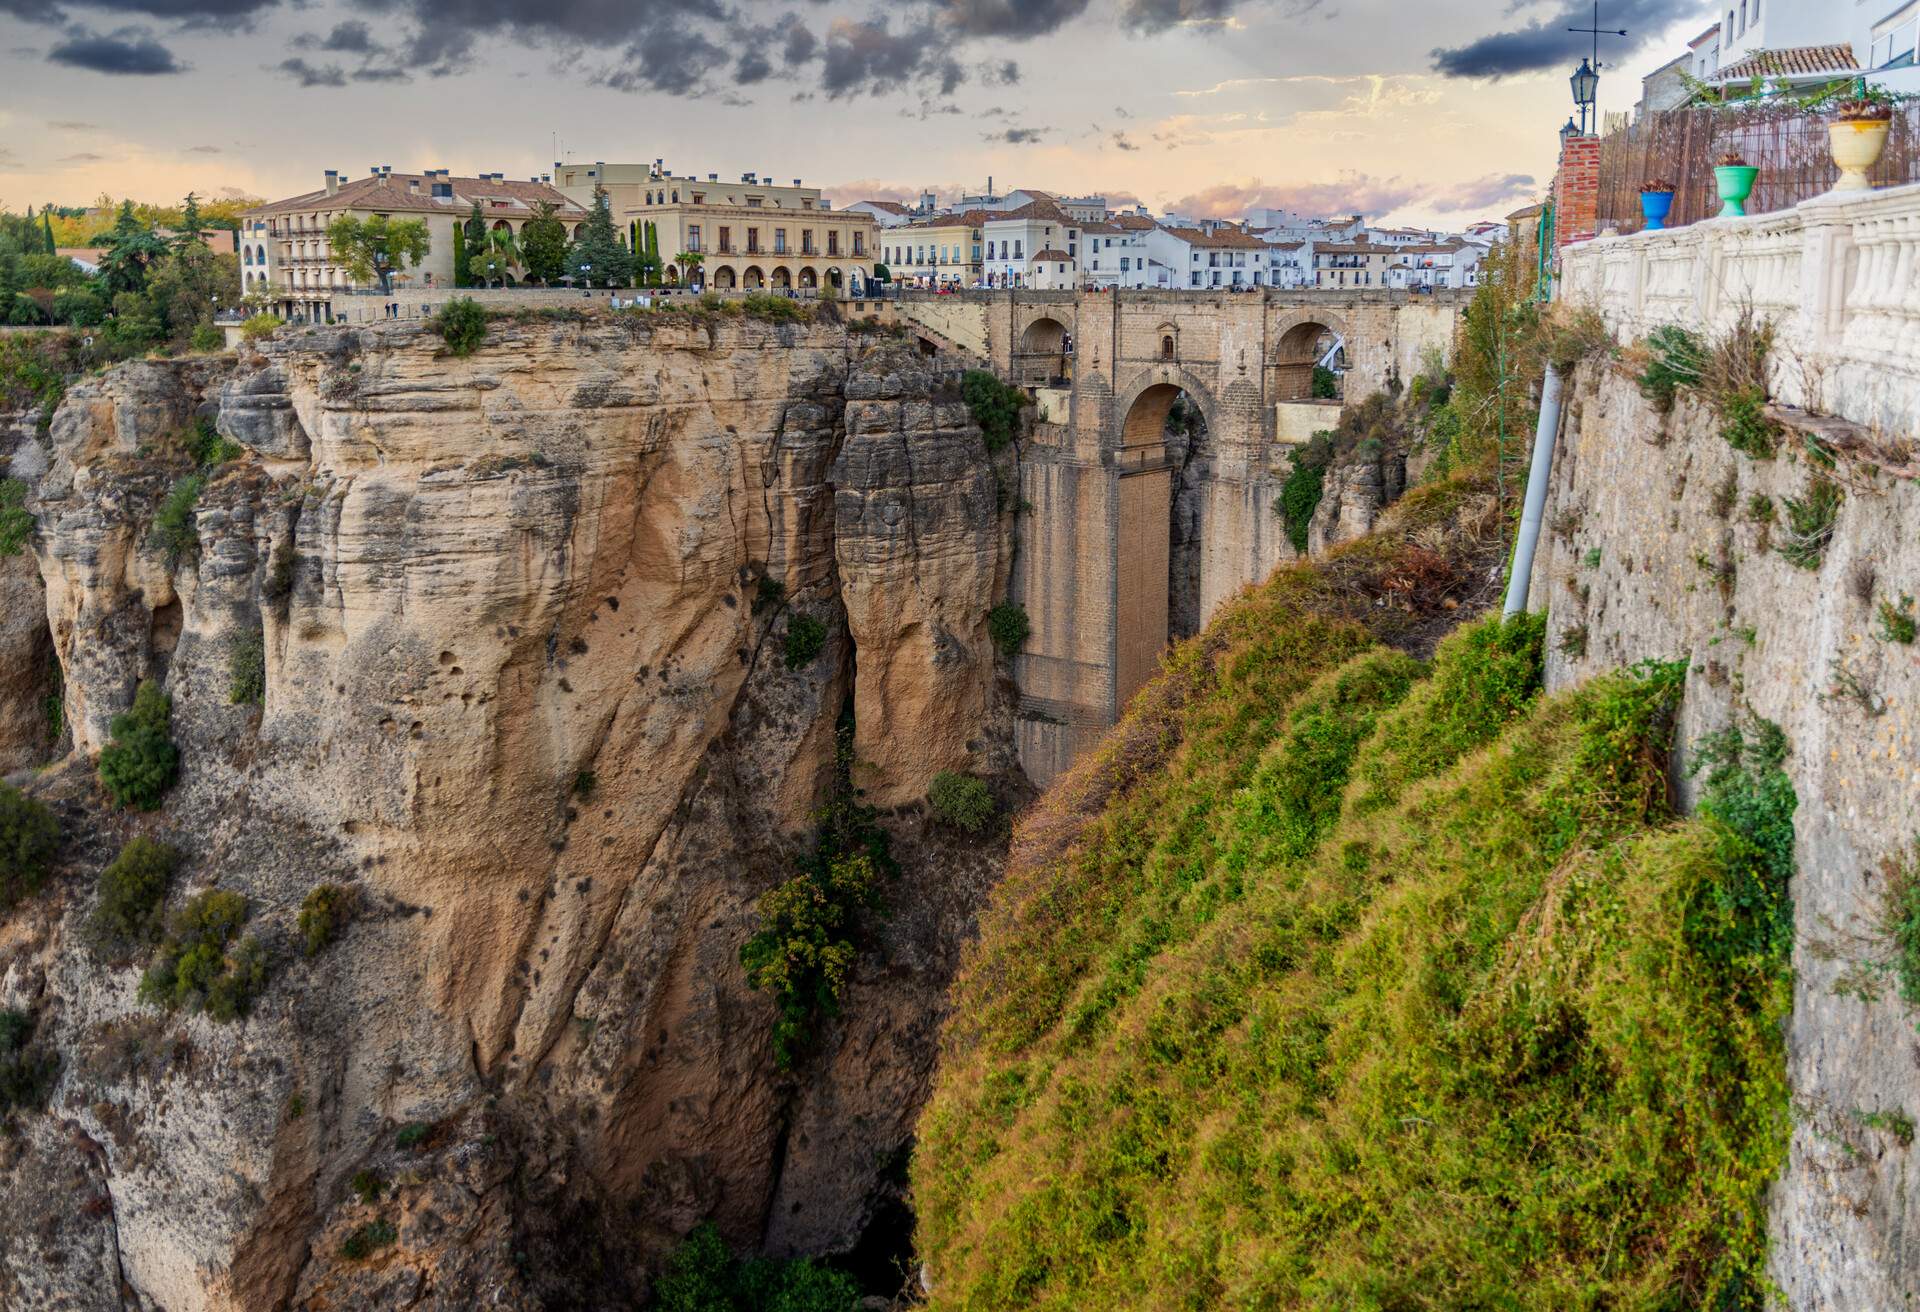 Ronda, one of the most charming cities in Andalusia, is located in the northwest of the province of Malaga, about 113 km. As we can see in the image, this Malaga town divides its urban area on both sides of the Tajo, a gorge more than 150 meters deep through which the Guadalevín River runs. Its old town is declared a Site of Cultural Interest.